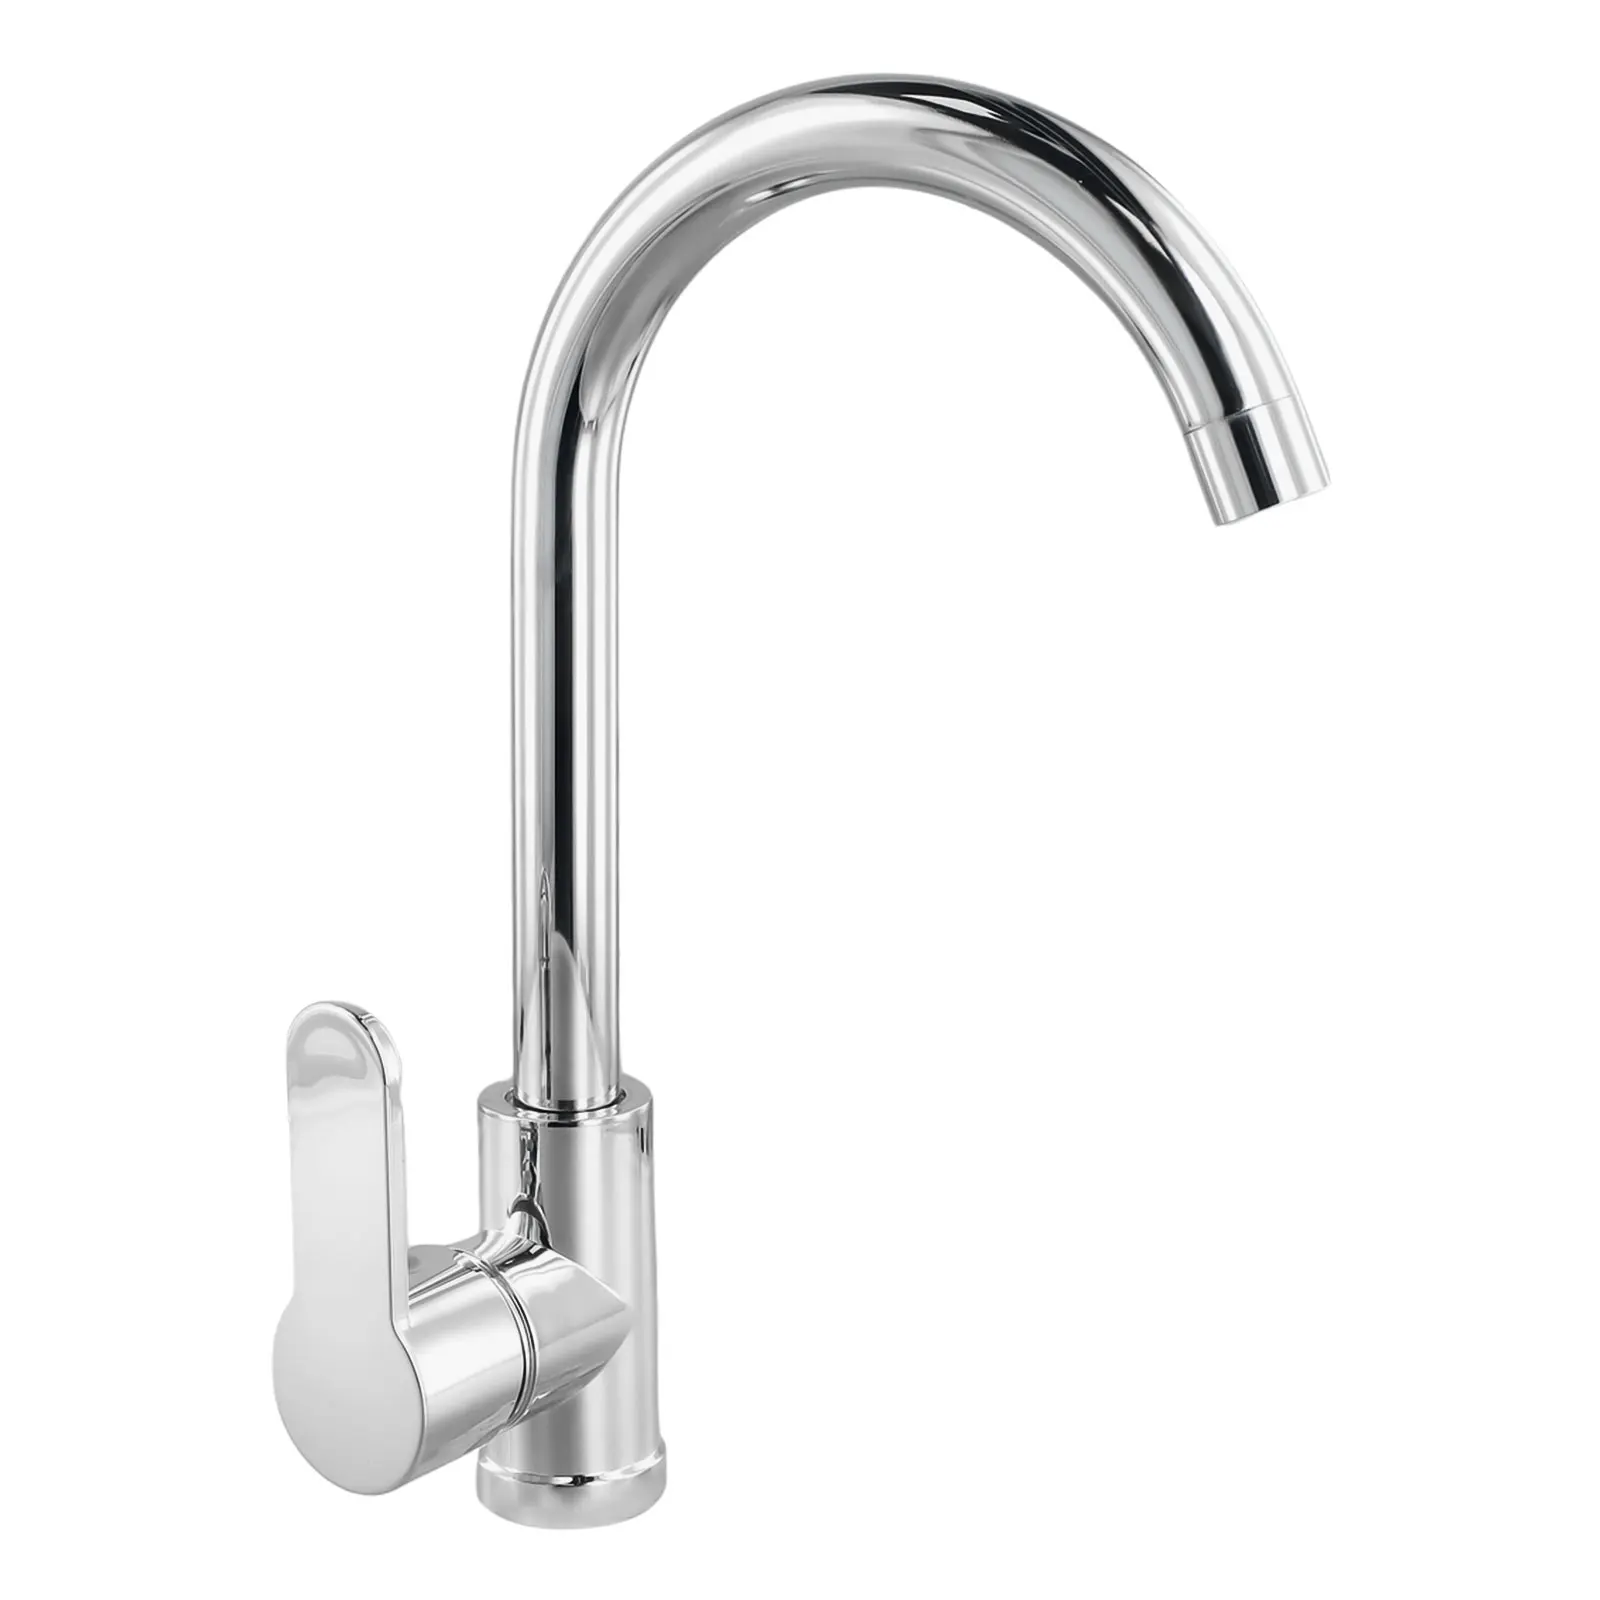 1 4 stainless steel alloy kitchen sink faucet tap chrome reverse osmosis ro drinking water filter Stainless Steel Kitchen Faucet Polished Chrome Plated Swivel Basin Sink Cold Hot Easy To Operate Mixer Tap